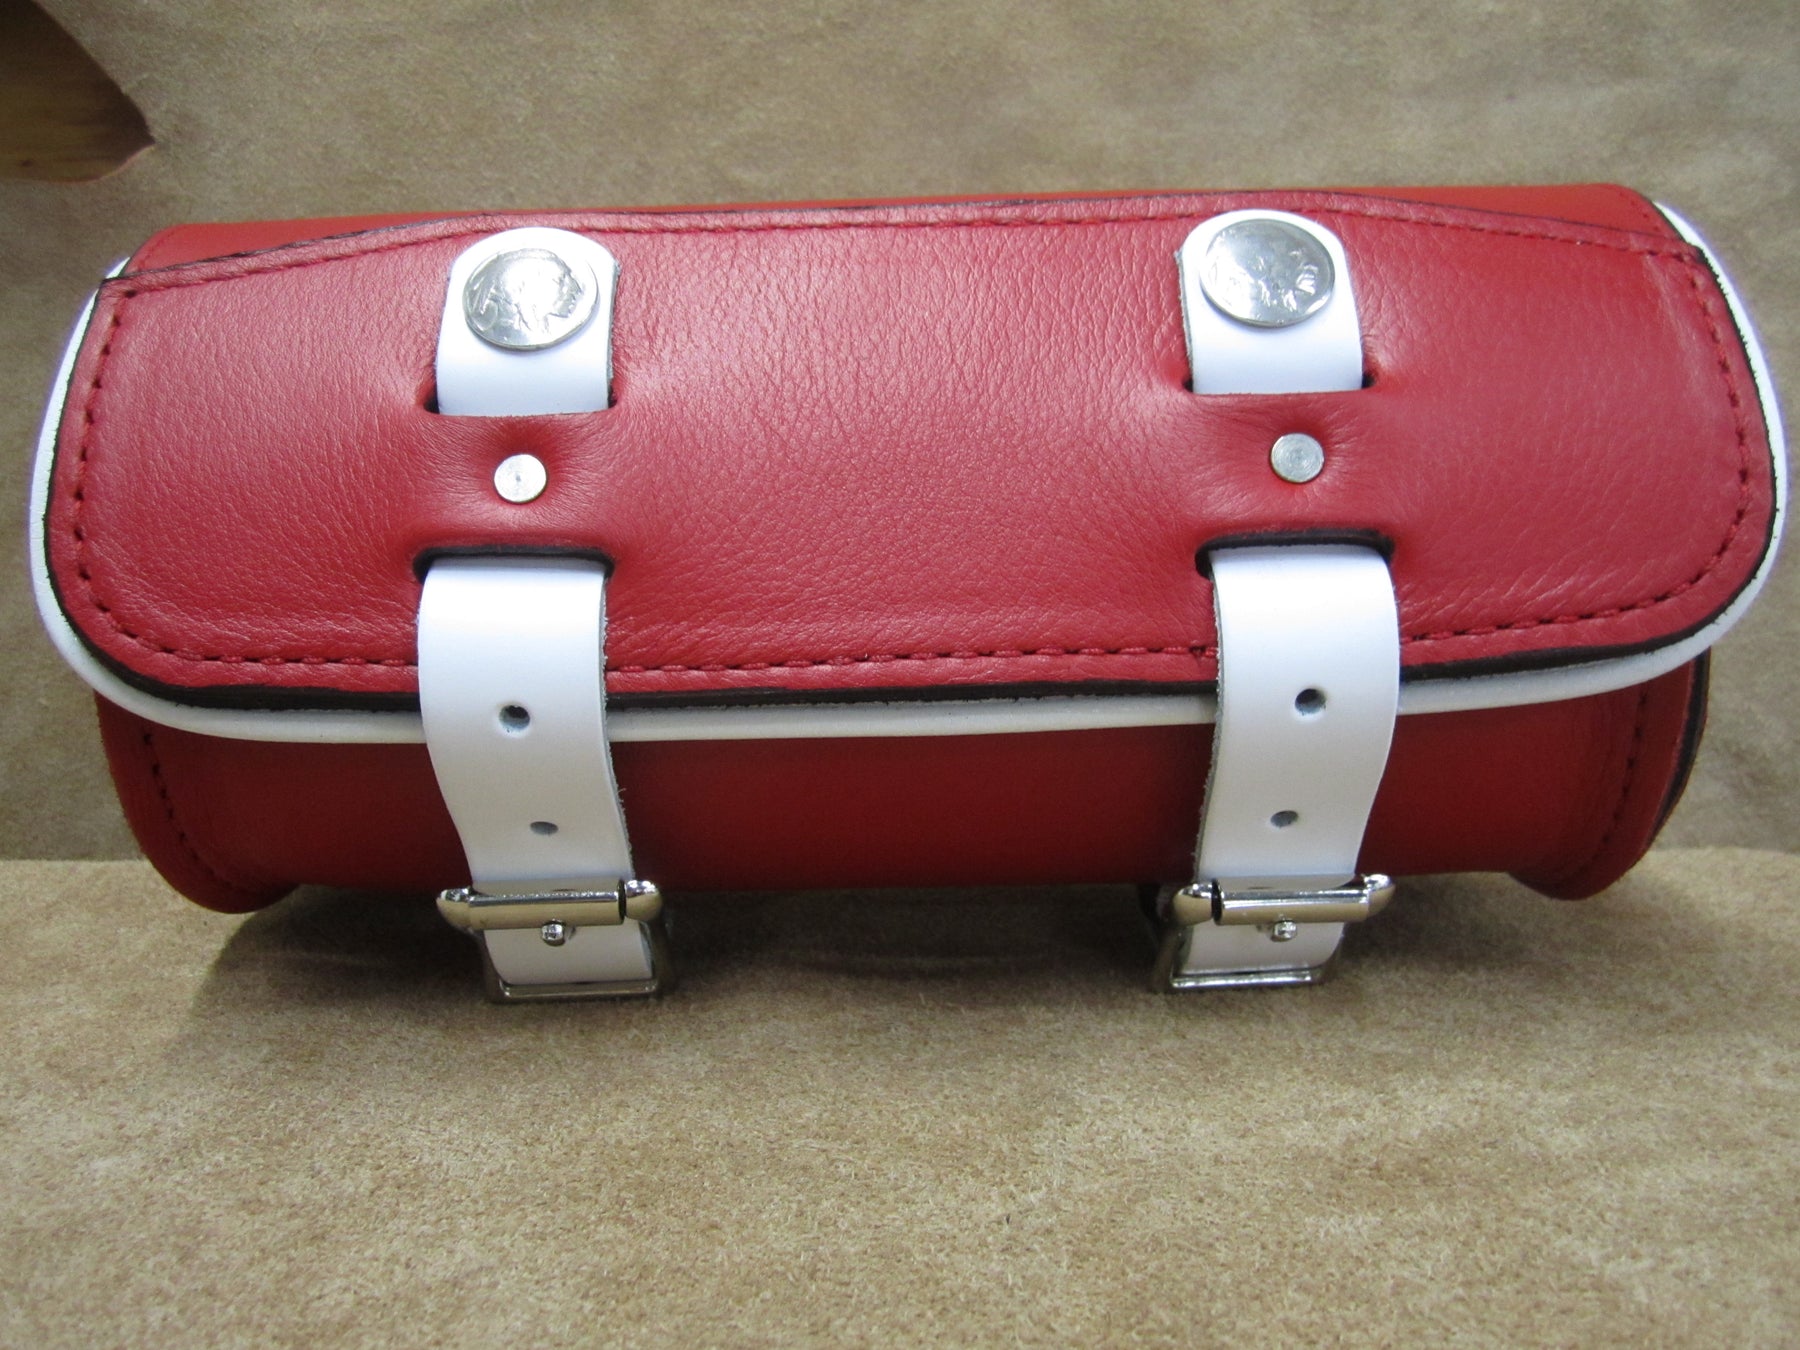 100 Leather Motorcycle Tool Bag